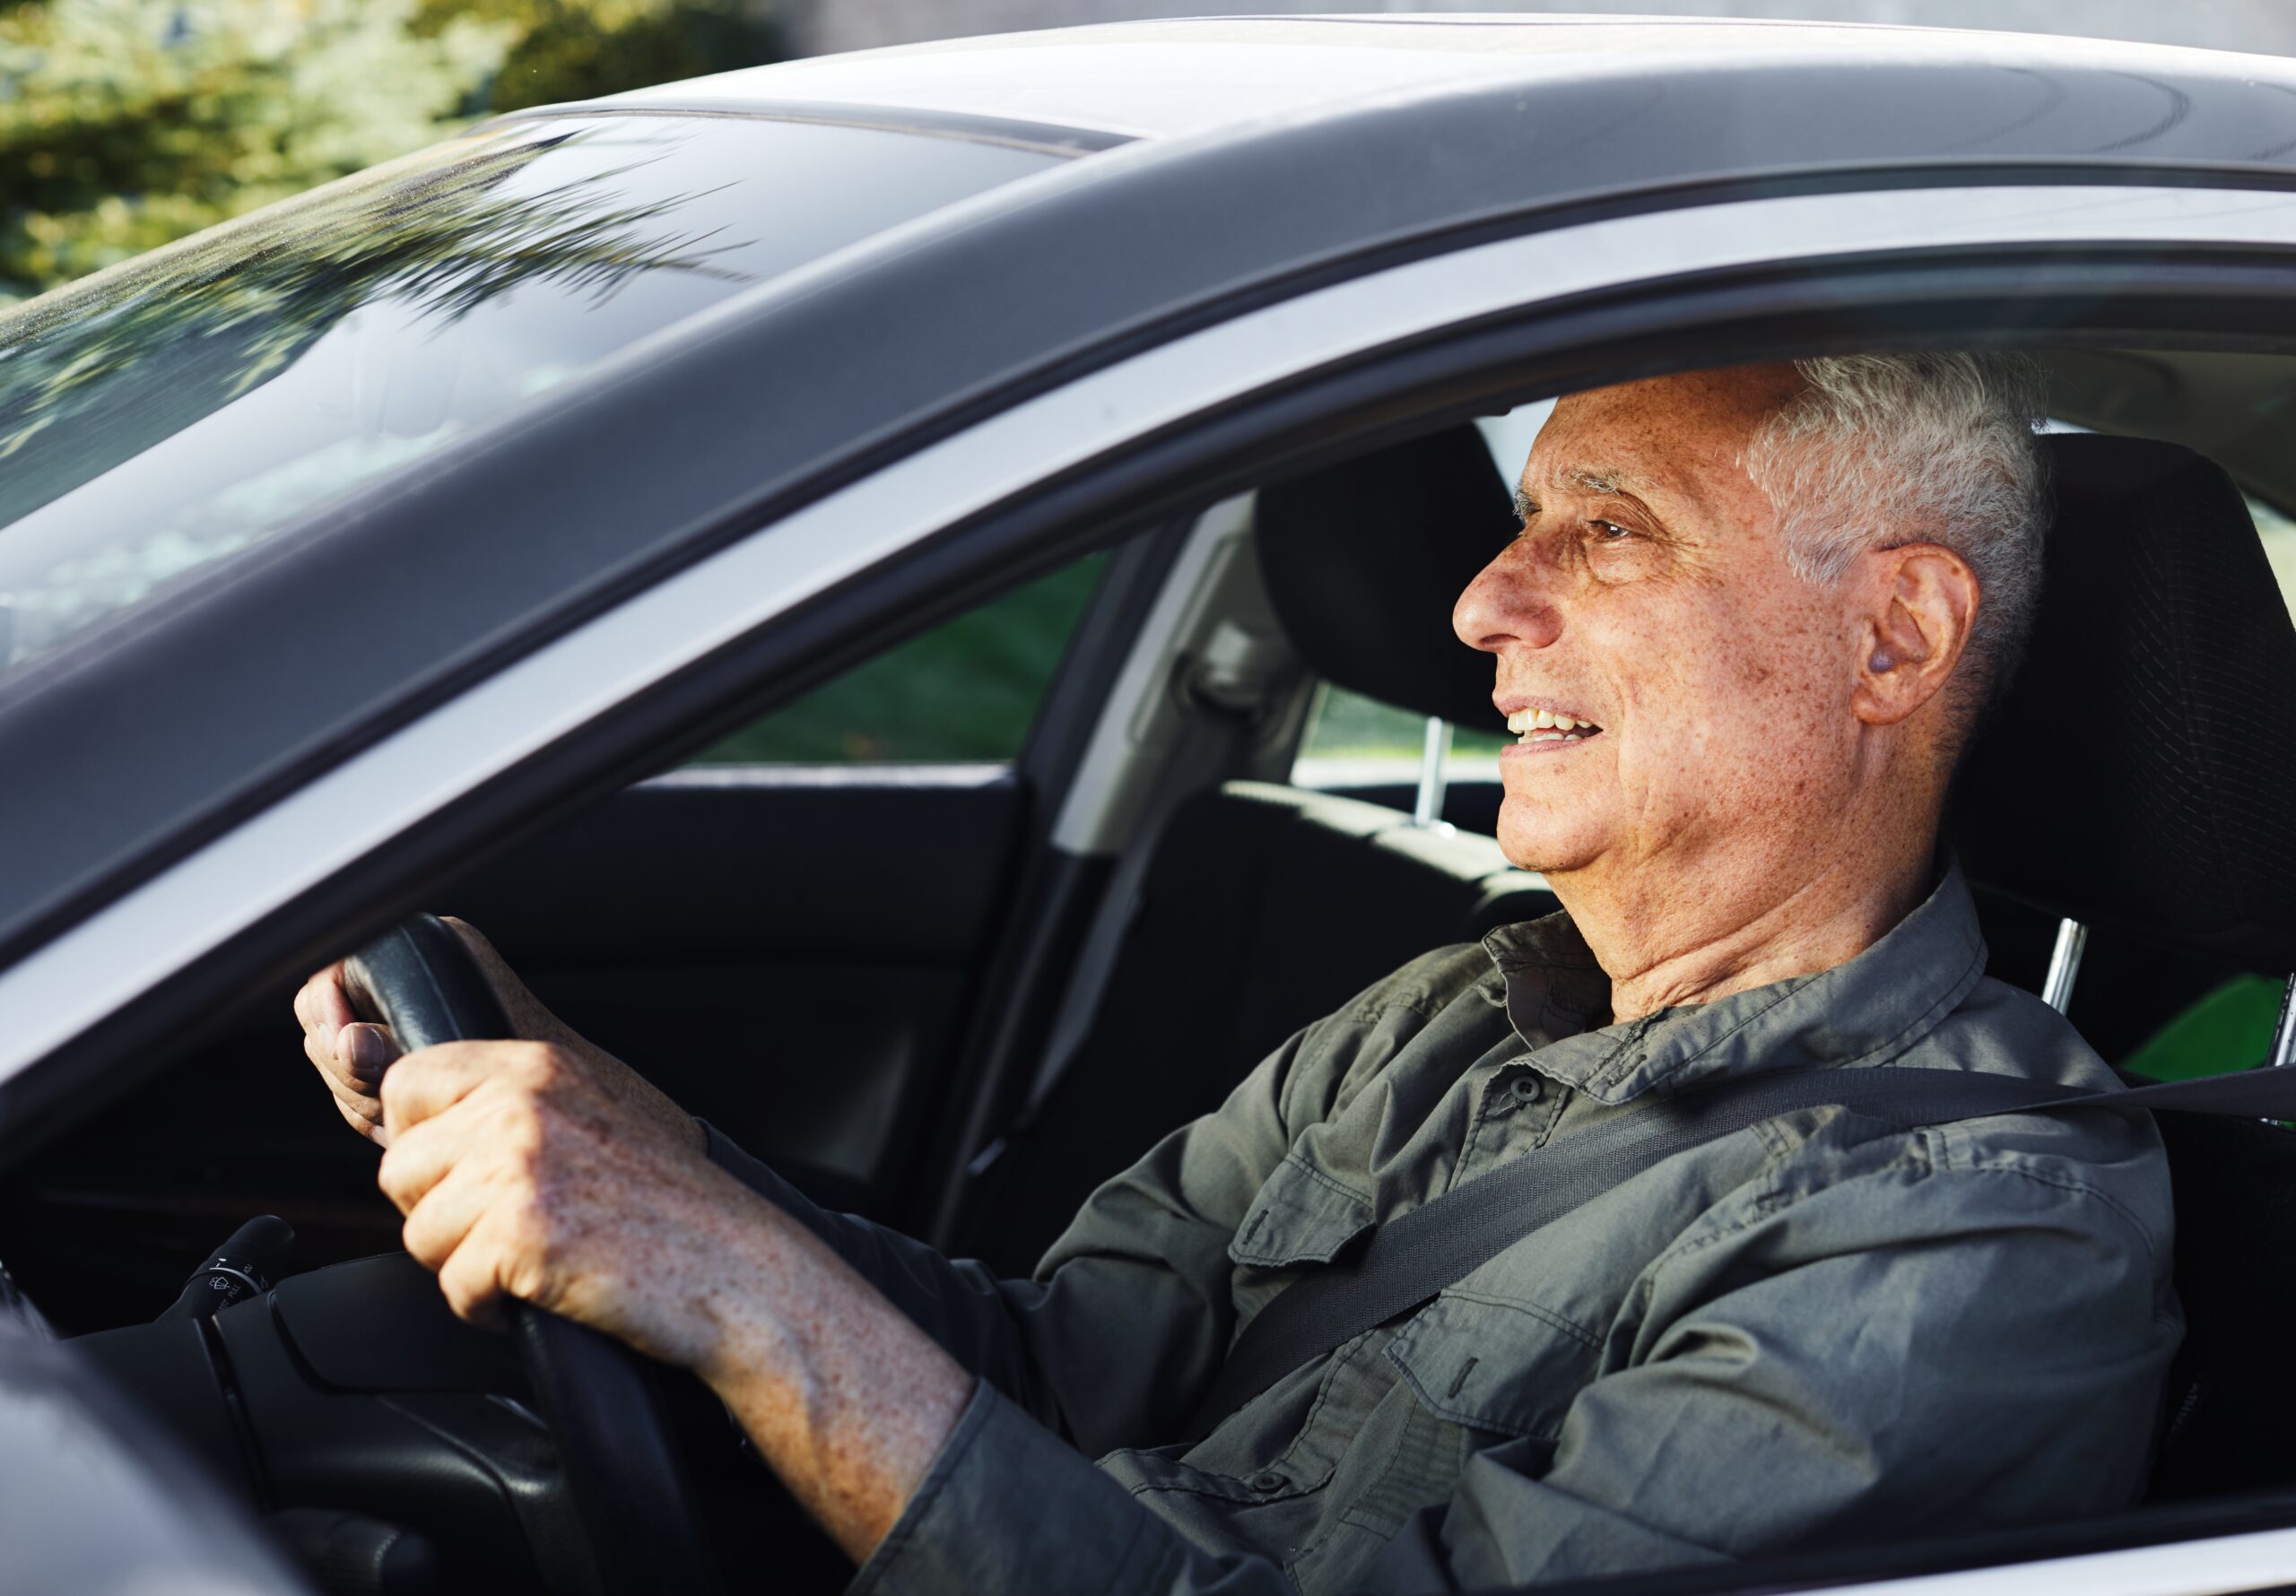 Keeping seniors safe on the road